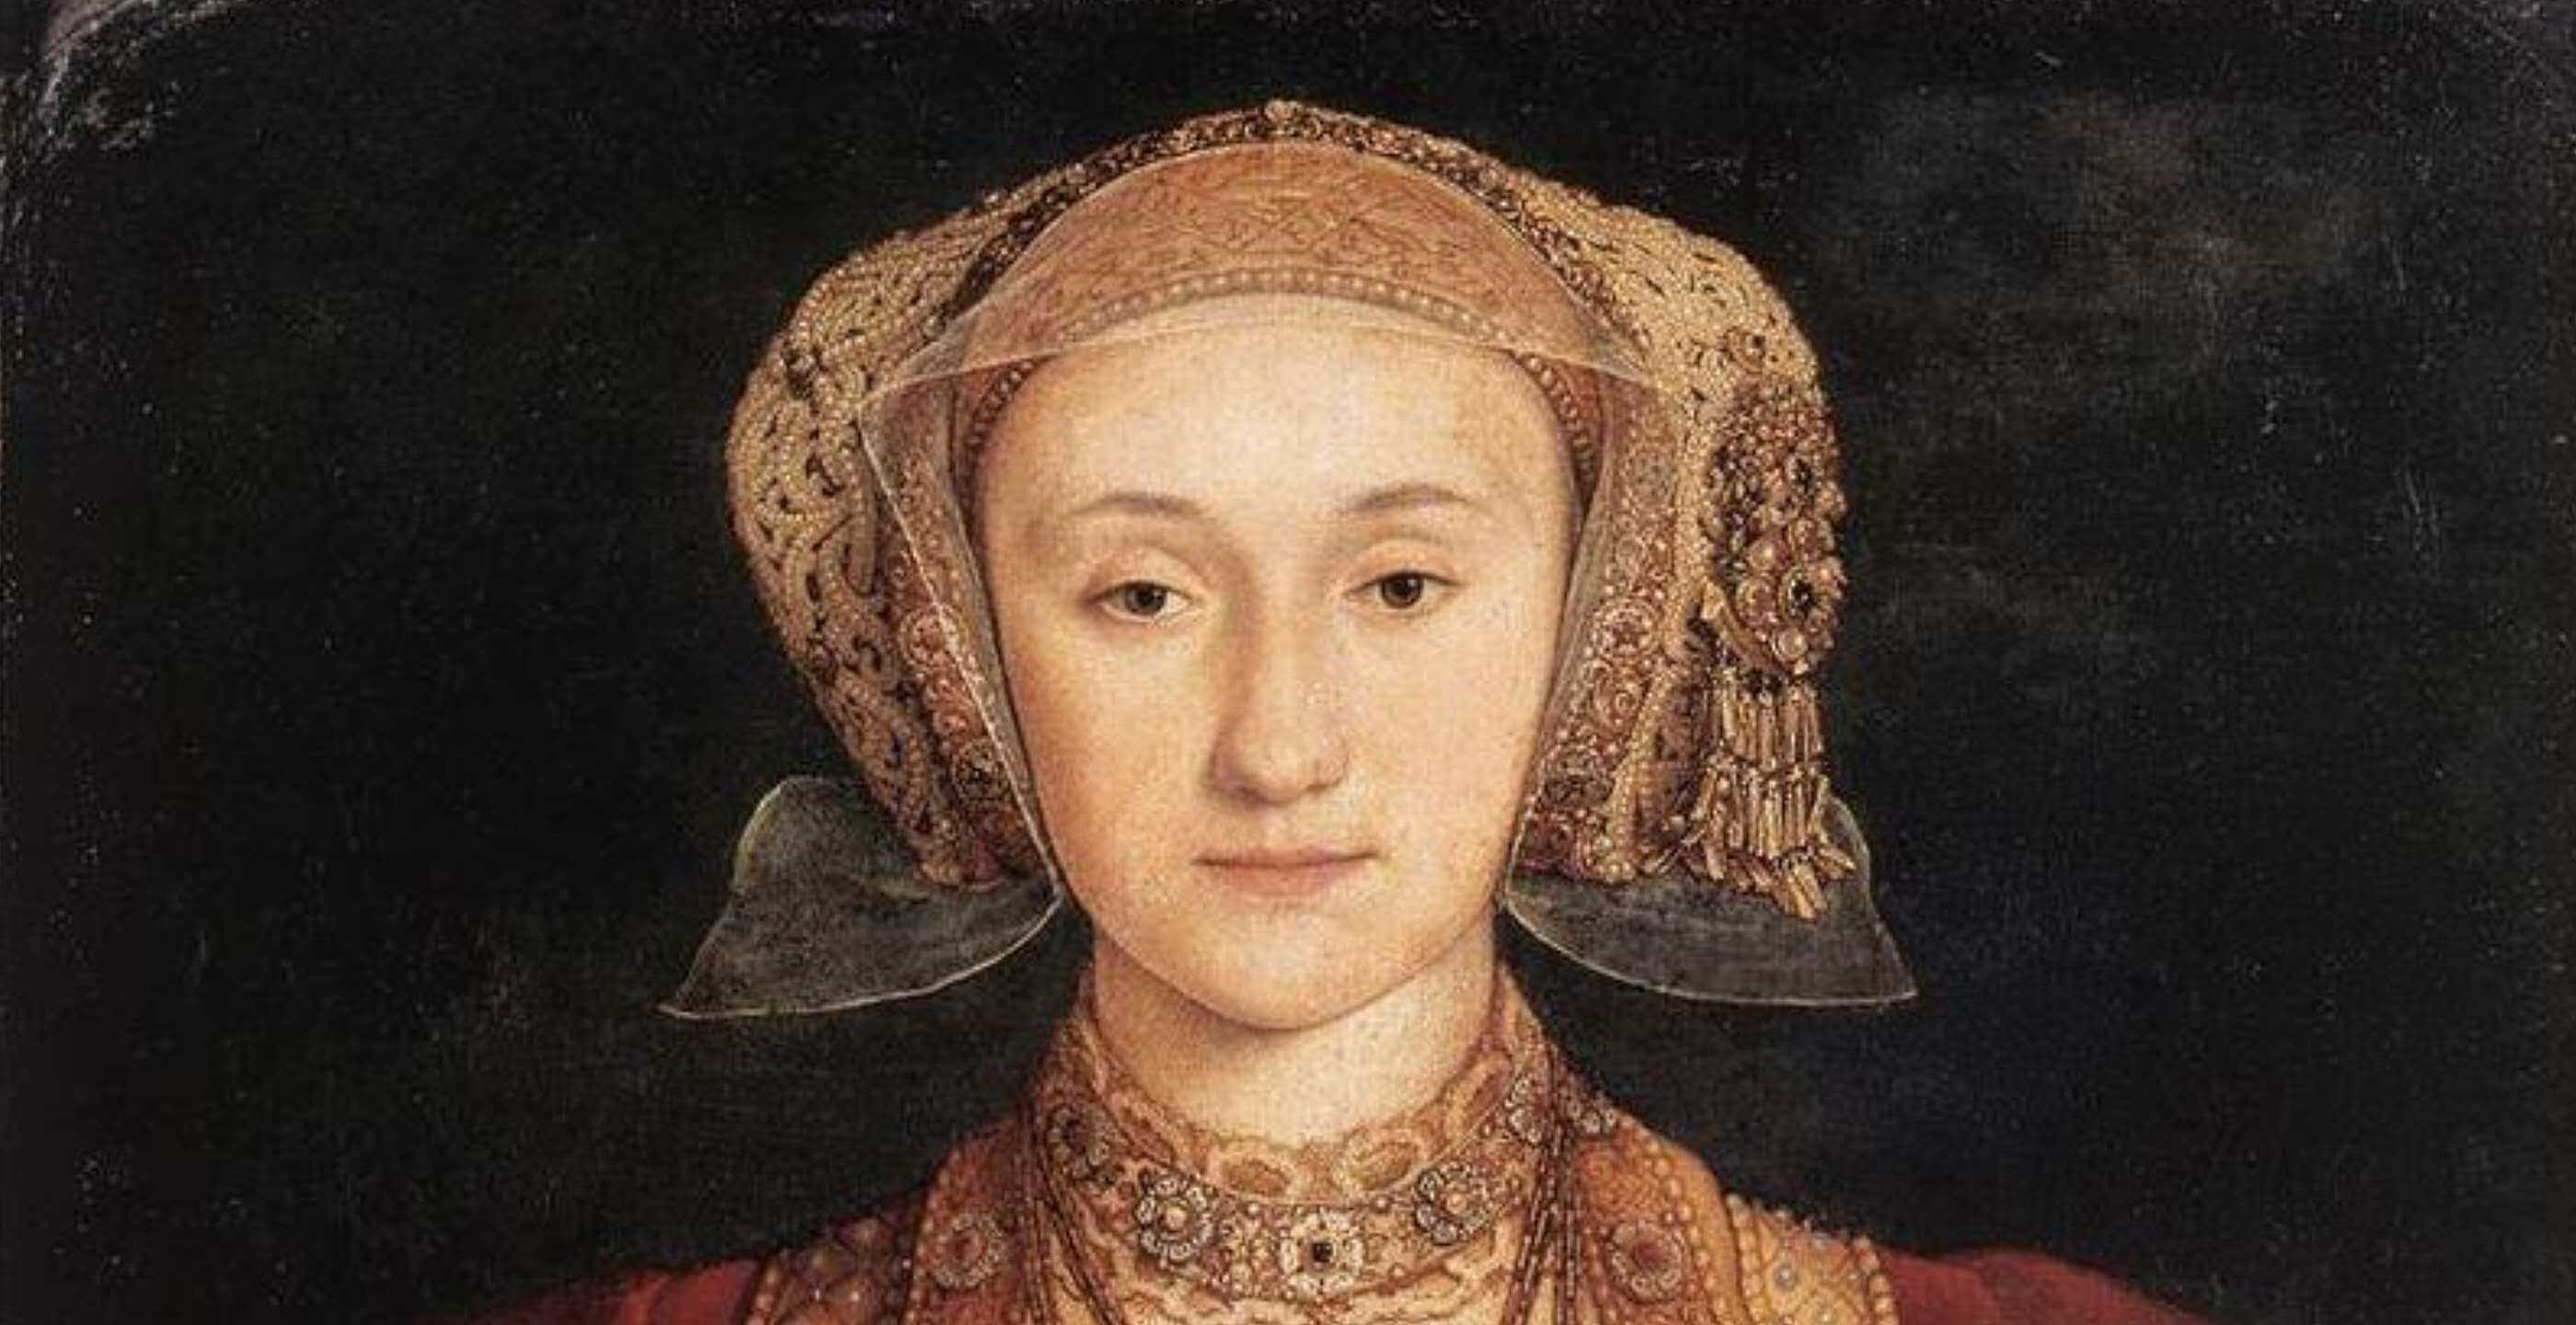 what happened to catherine of aragon after the divorce